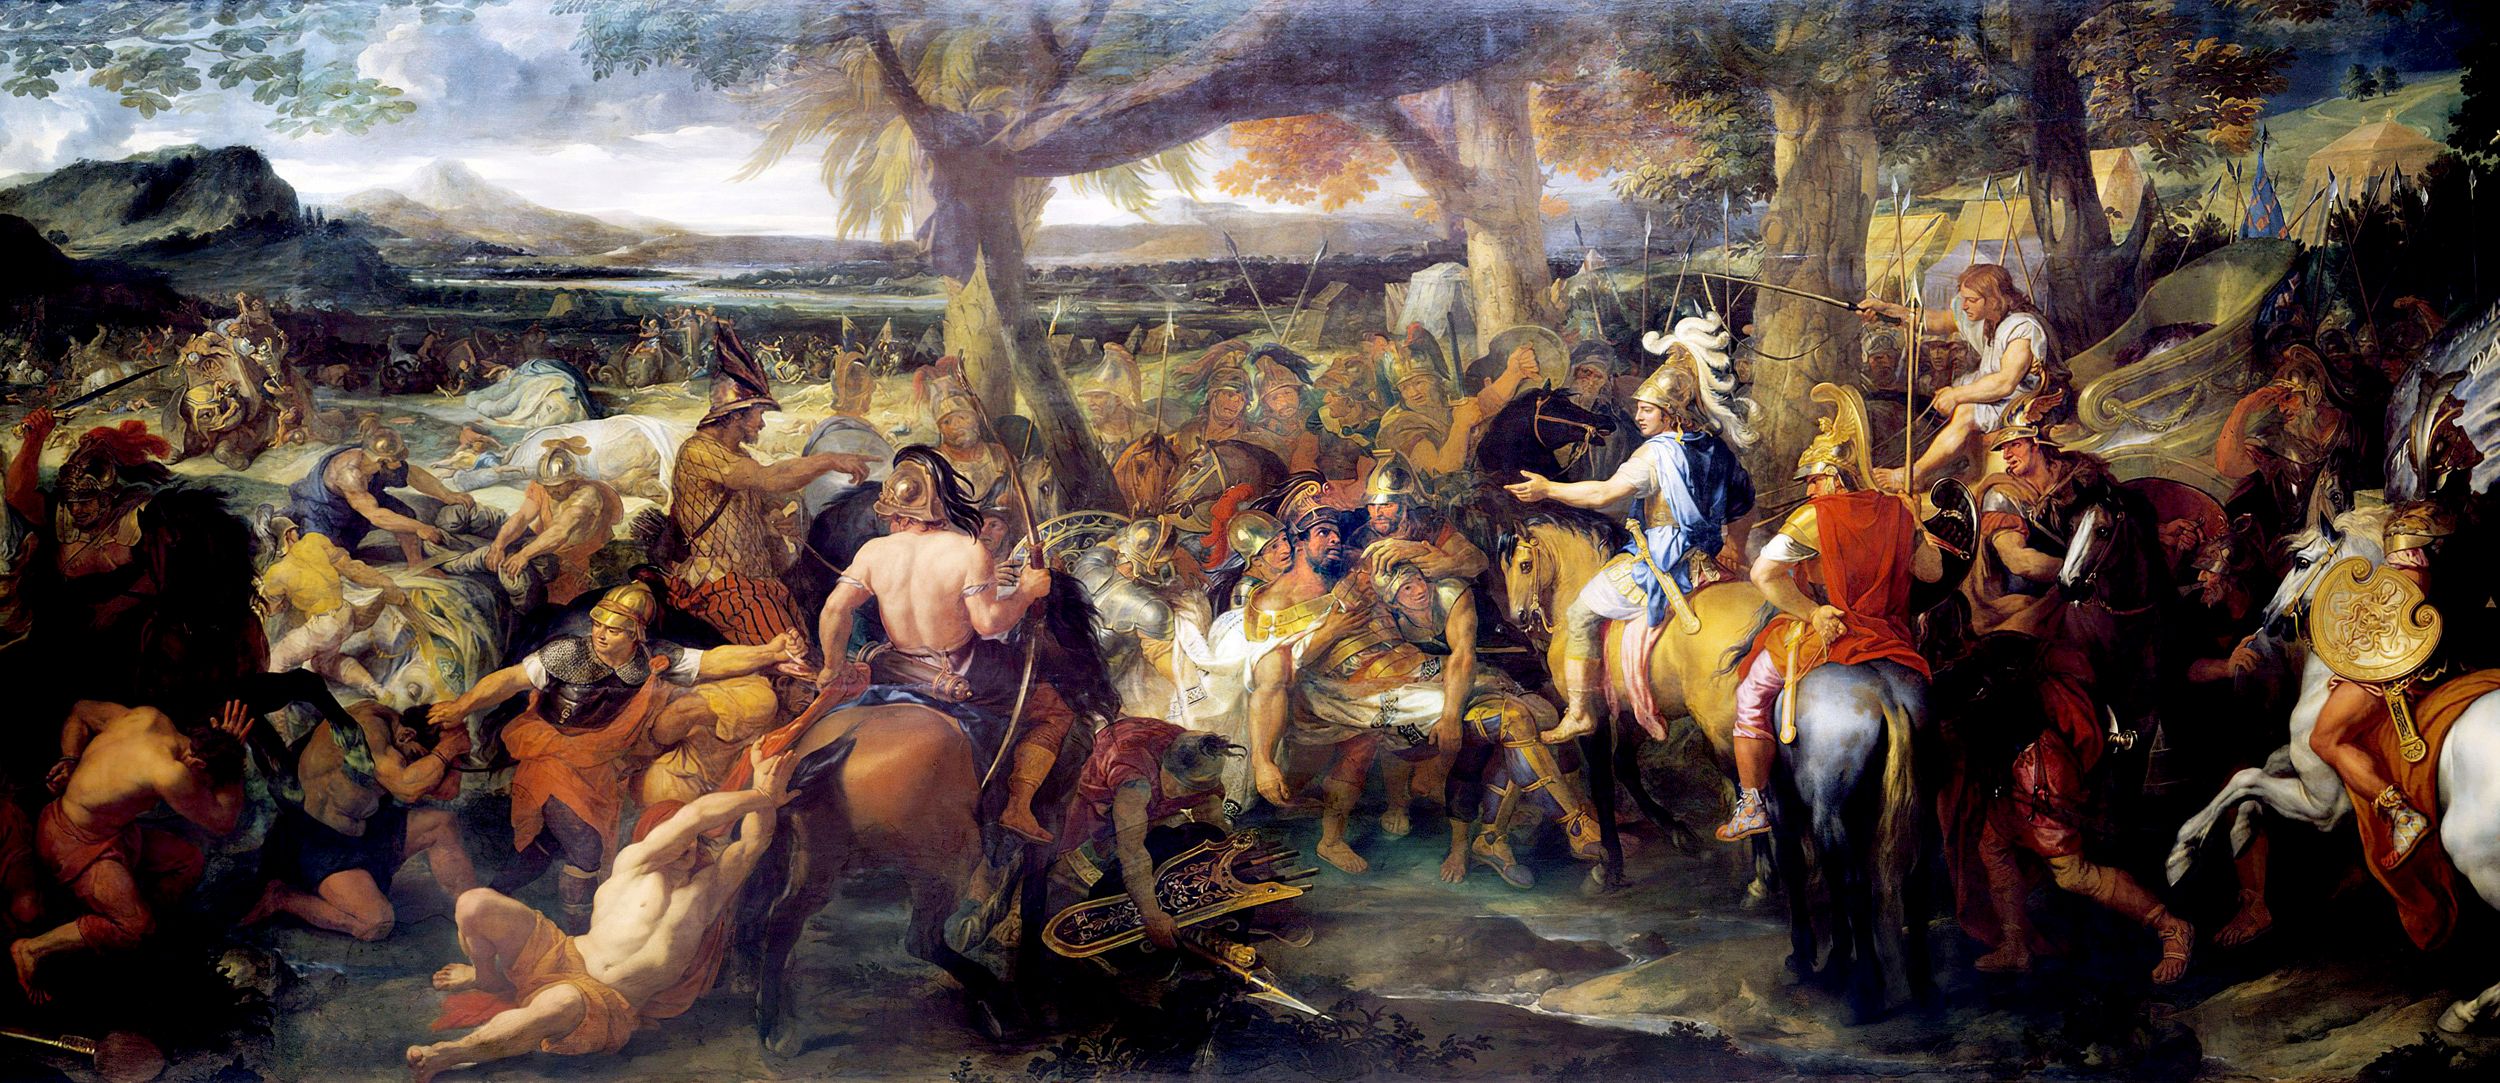 In May of 326 BCE, Alexander defeated Porus in the Battle of the Hydaspes, folding a large part of Punjab (much of which is now modern Pakistan) into his Macedonian empire. The battle is depicted in this 1673 painting “Alexander and Porus,”  by Charles Le Brun, the most influential French artist during the reign of Louis XIV. 